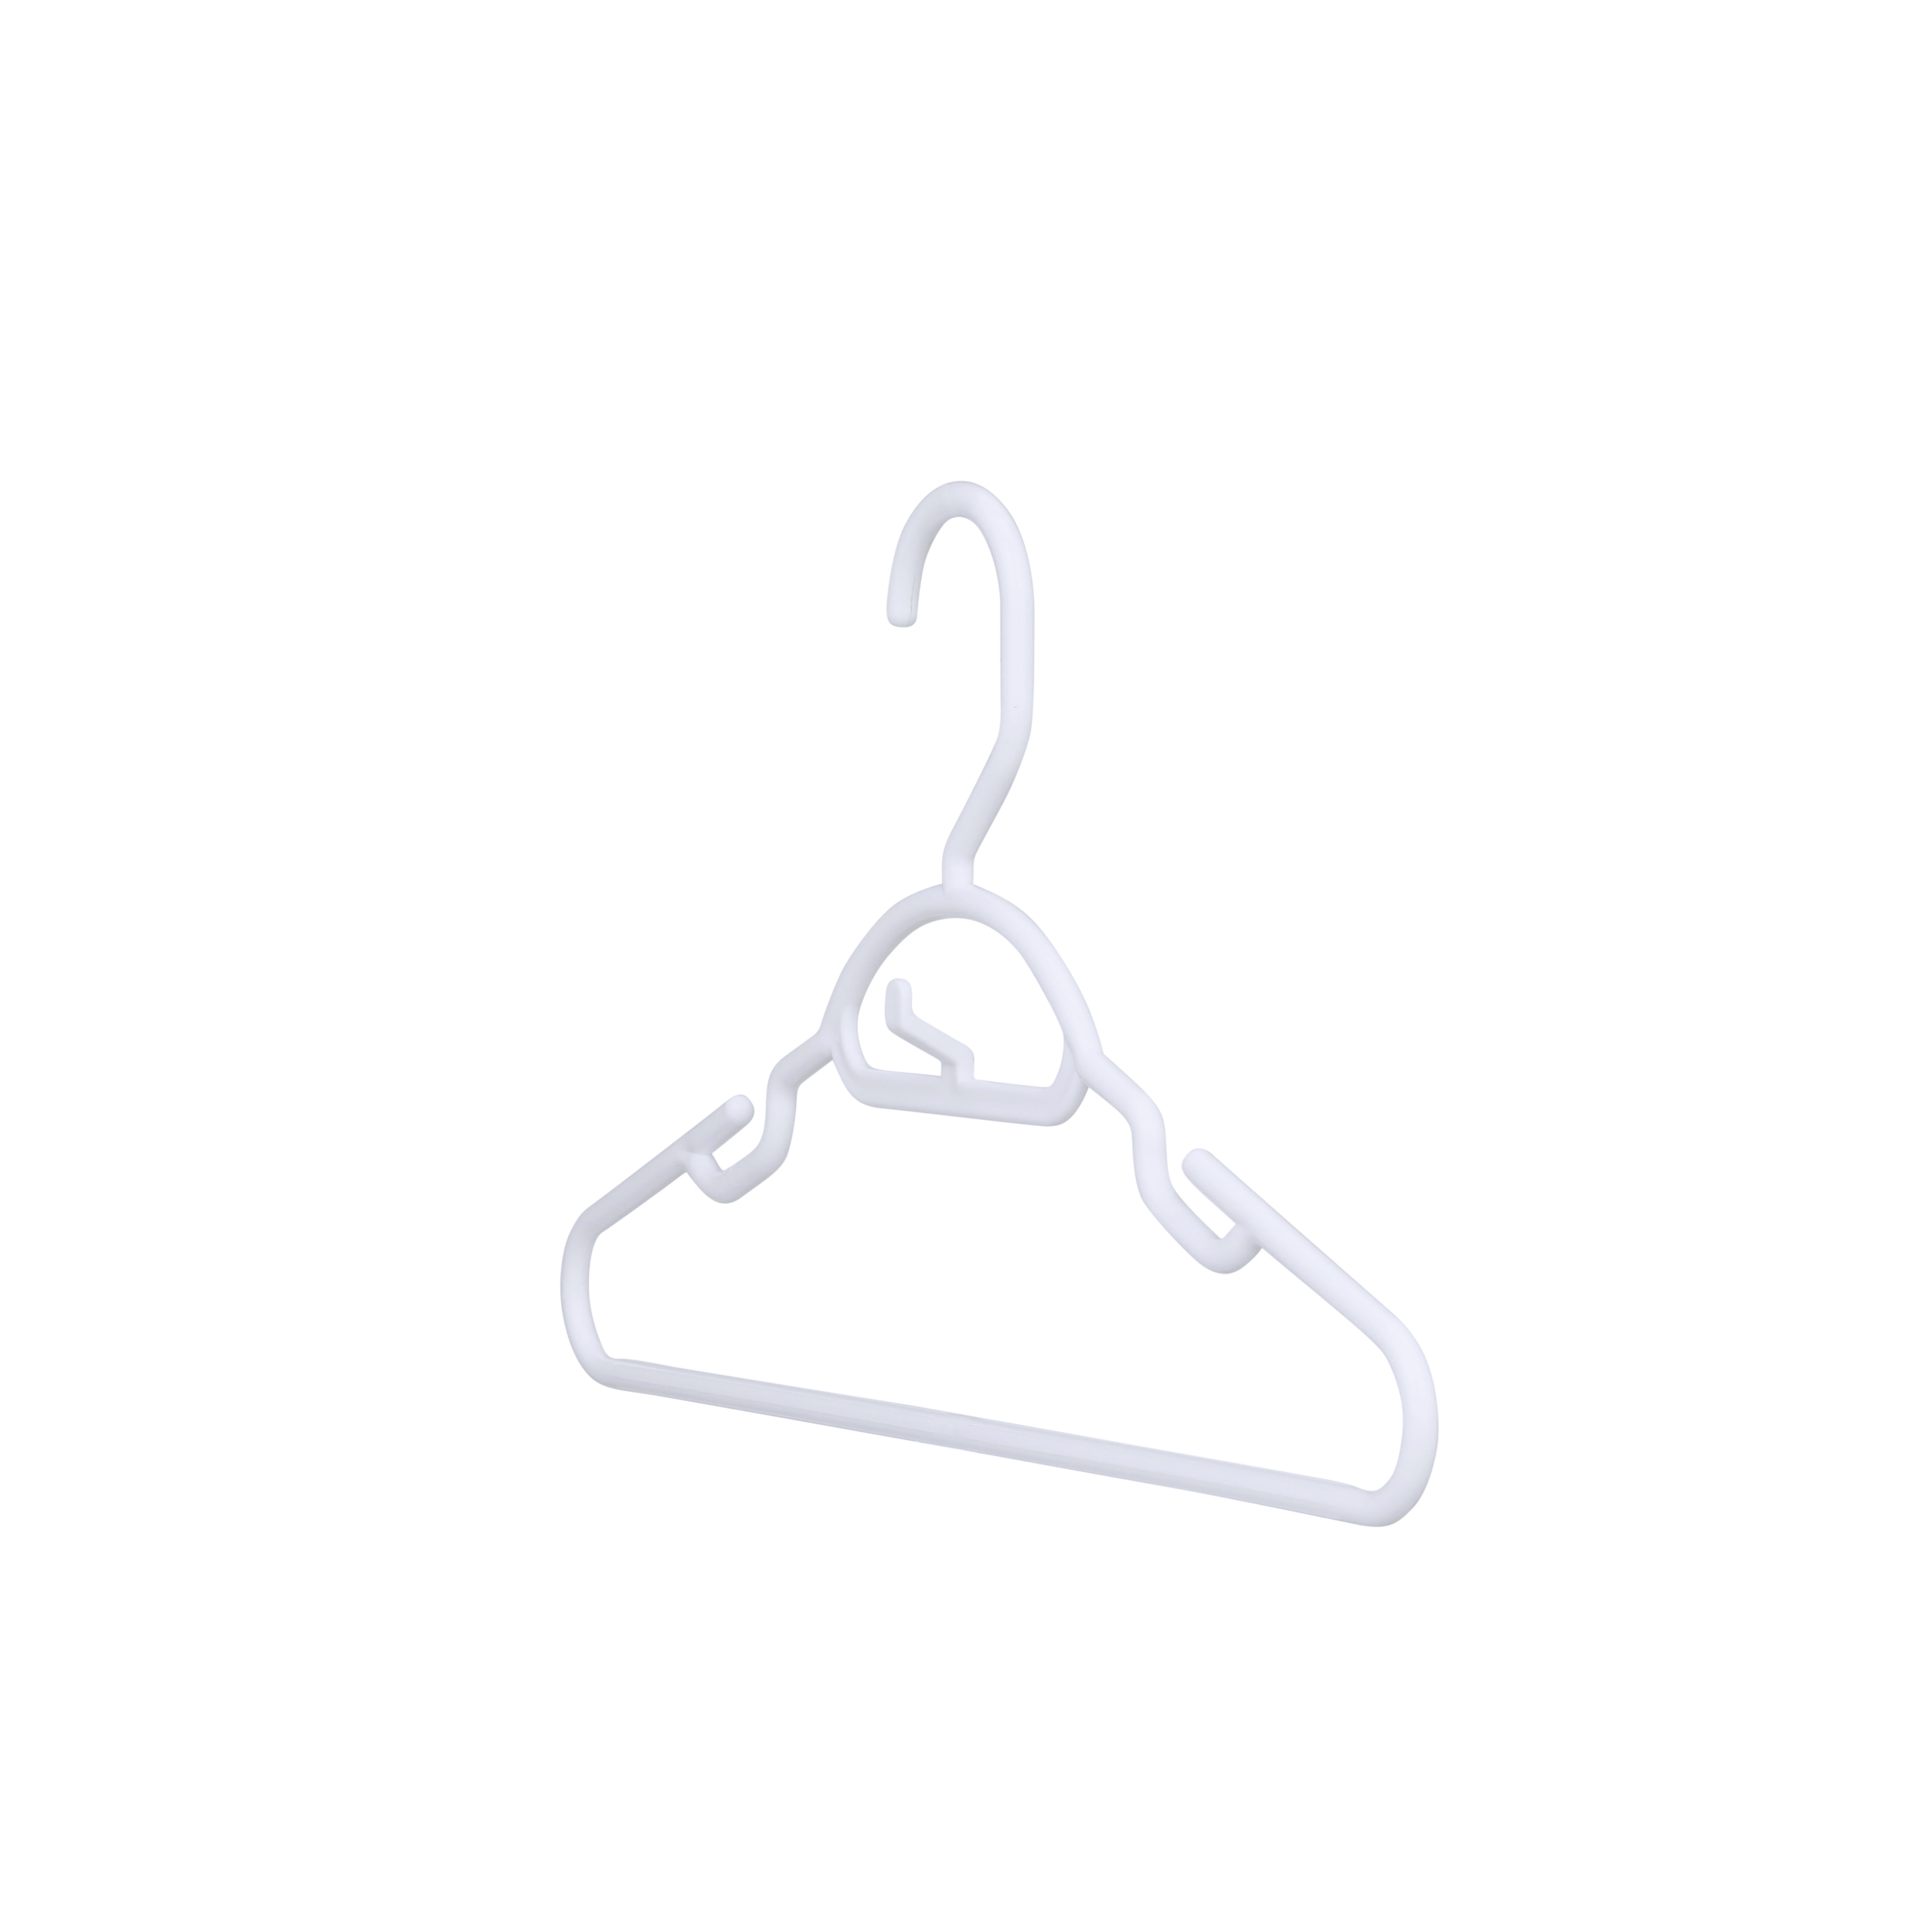 30 Pk Blue Youth Petite Plastic Hangers for Children Clothes Sizes 8 to 14, Petite,Teen, Preteen, Junior, 30 Pack (Waltz Blue)